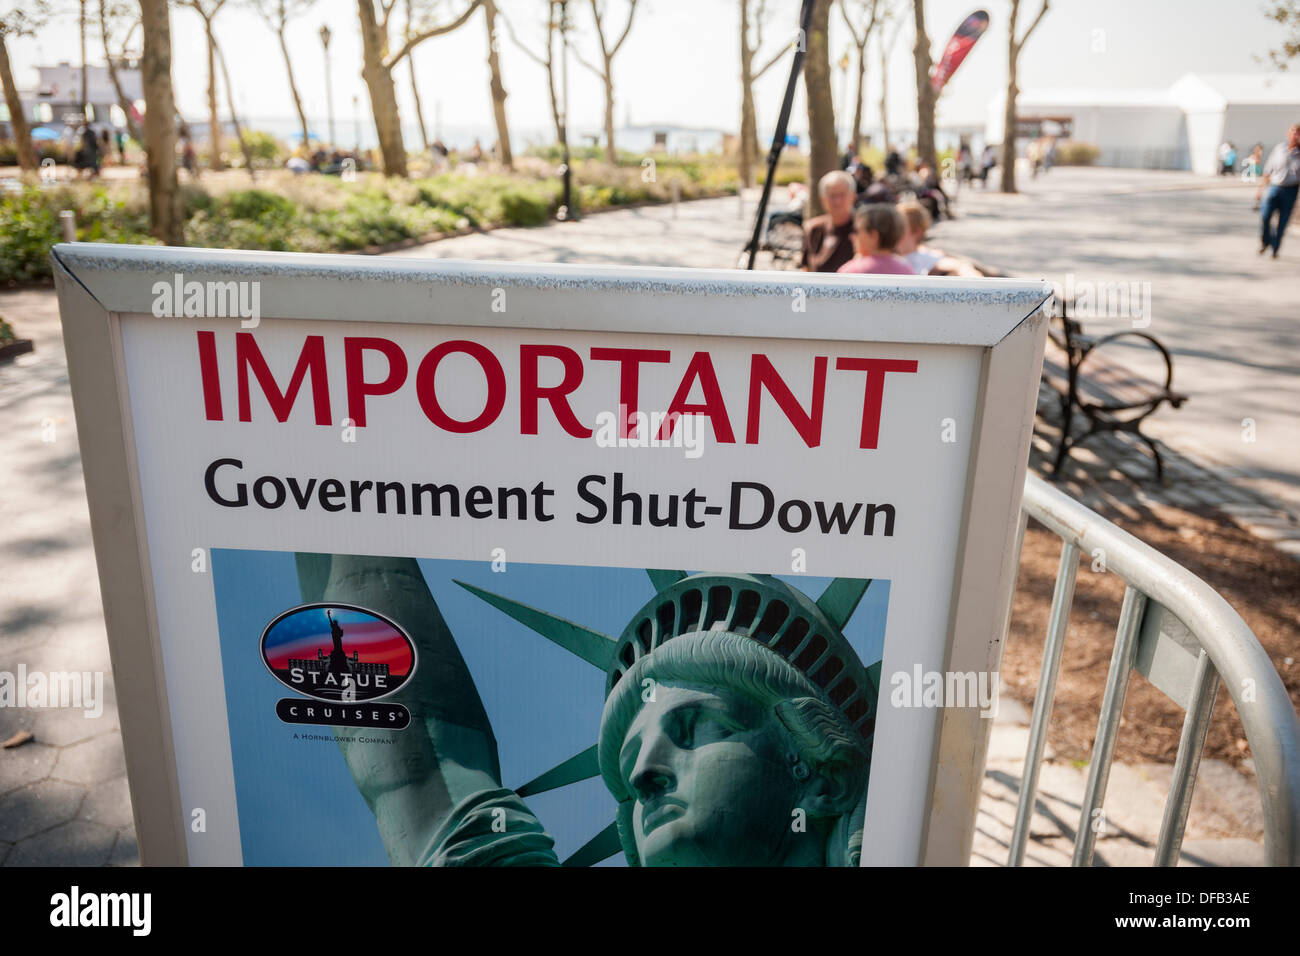 New York, USA. 1st October 2013. A sign in Battery Park  in New York where ferries to the Statue of Liberty launch informs tourists that the statue is closed, seen on Tuesday, October 1, 2013. A partial government shutdown took effect today because of a dispute between Democrats and Republicans in Congress over the Obamacare program. Approximately 800,000 federal workers have been furloughed and only essential services are up and running.  Credit:  Richard B. Levine/Alamy Live News Stock Photo